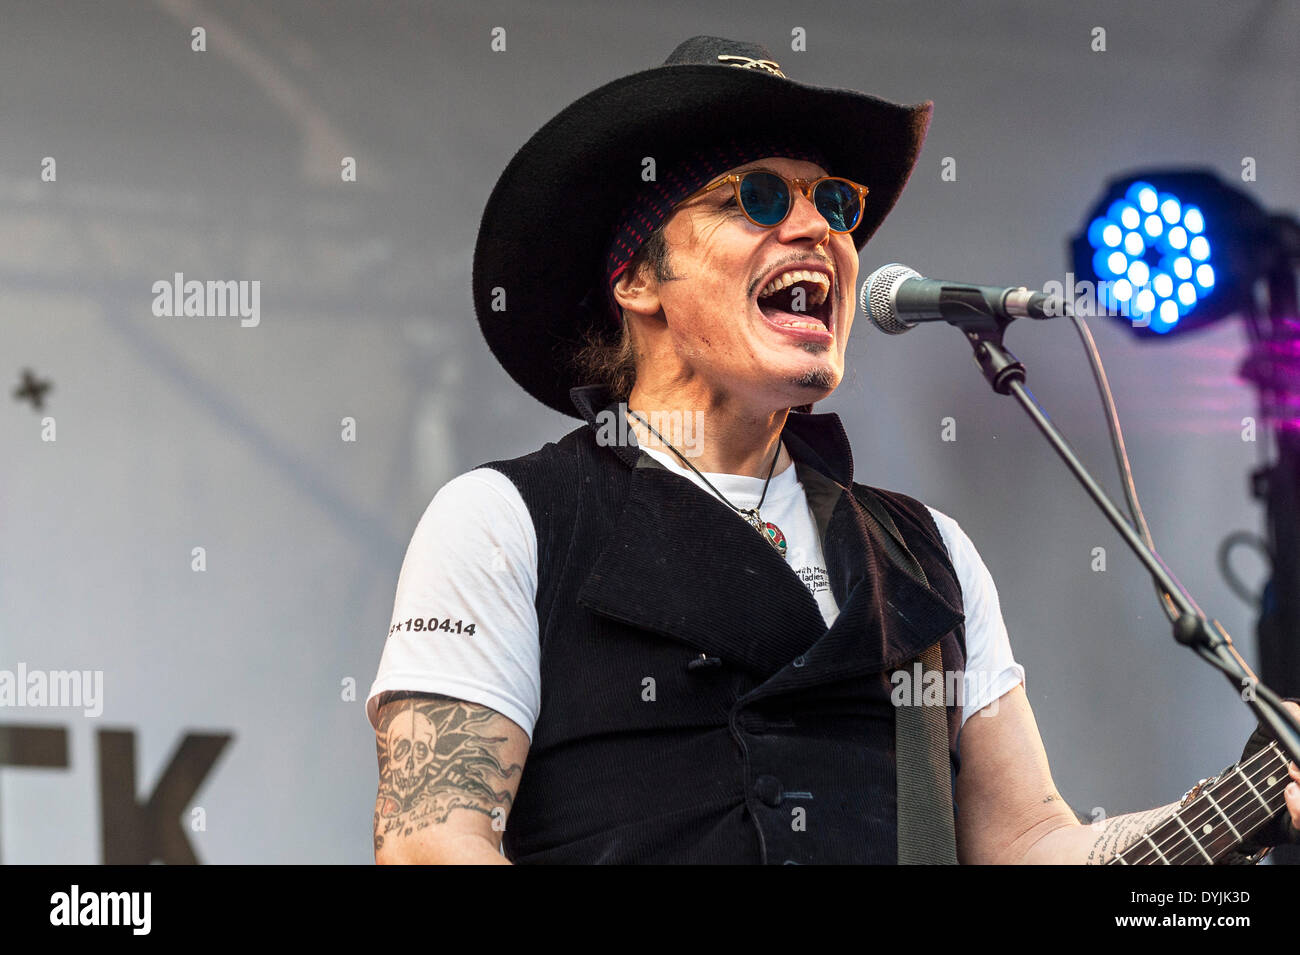 London, UK, 19th April 2014. Adam Ant enjoys himself performing at the Berwick Street Record Day in London.  Photographer;  Gordon Scammell/Alamy Live News Stock Photo